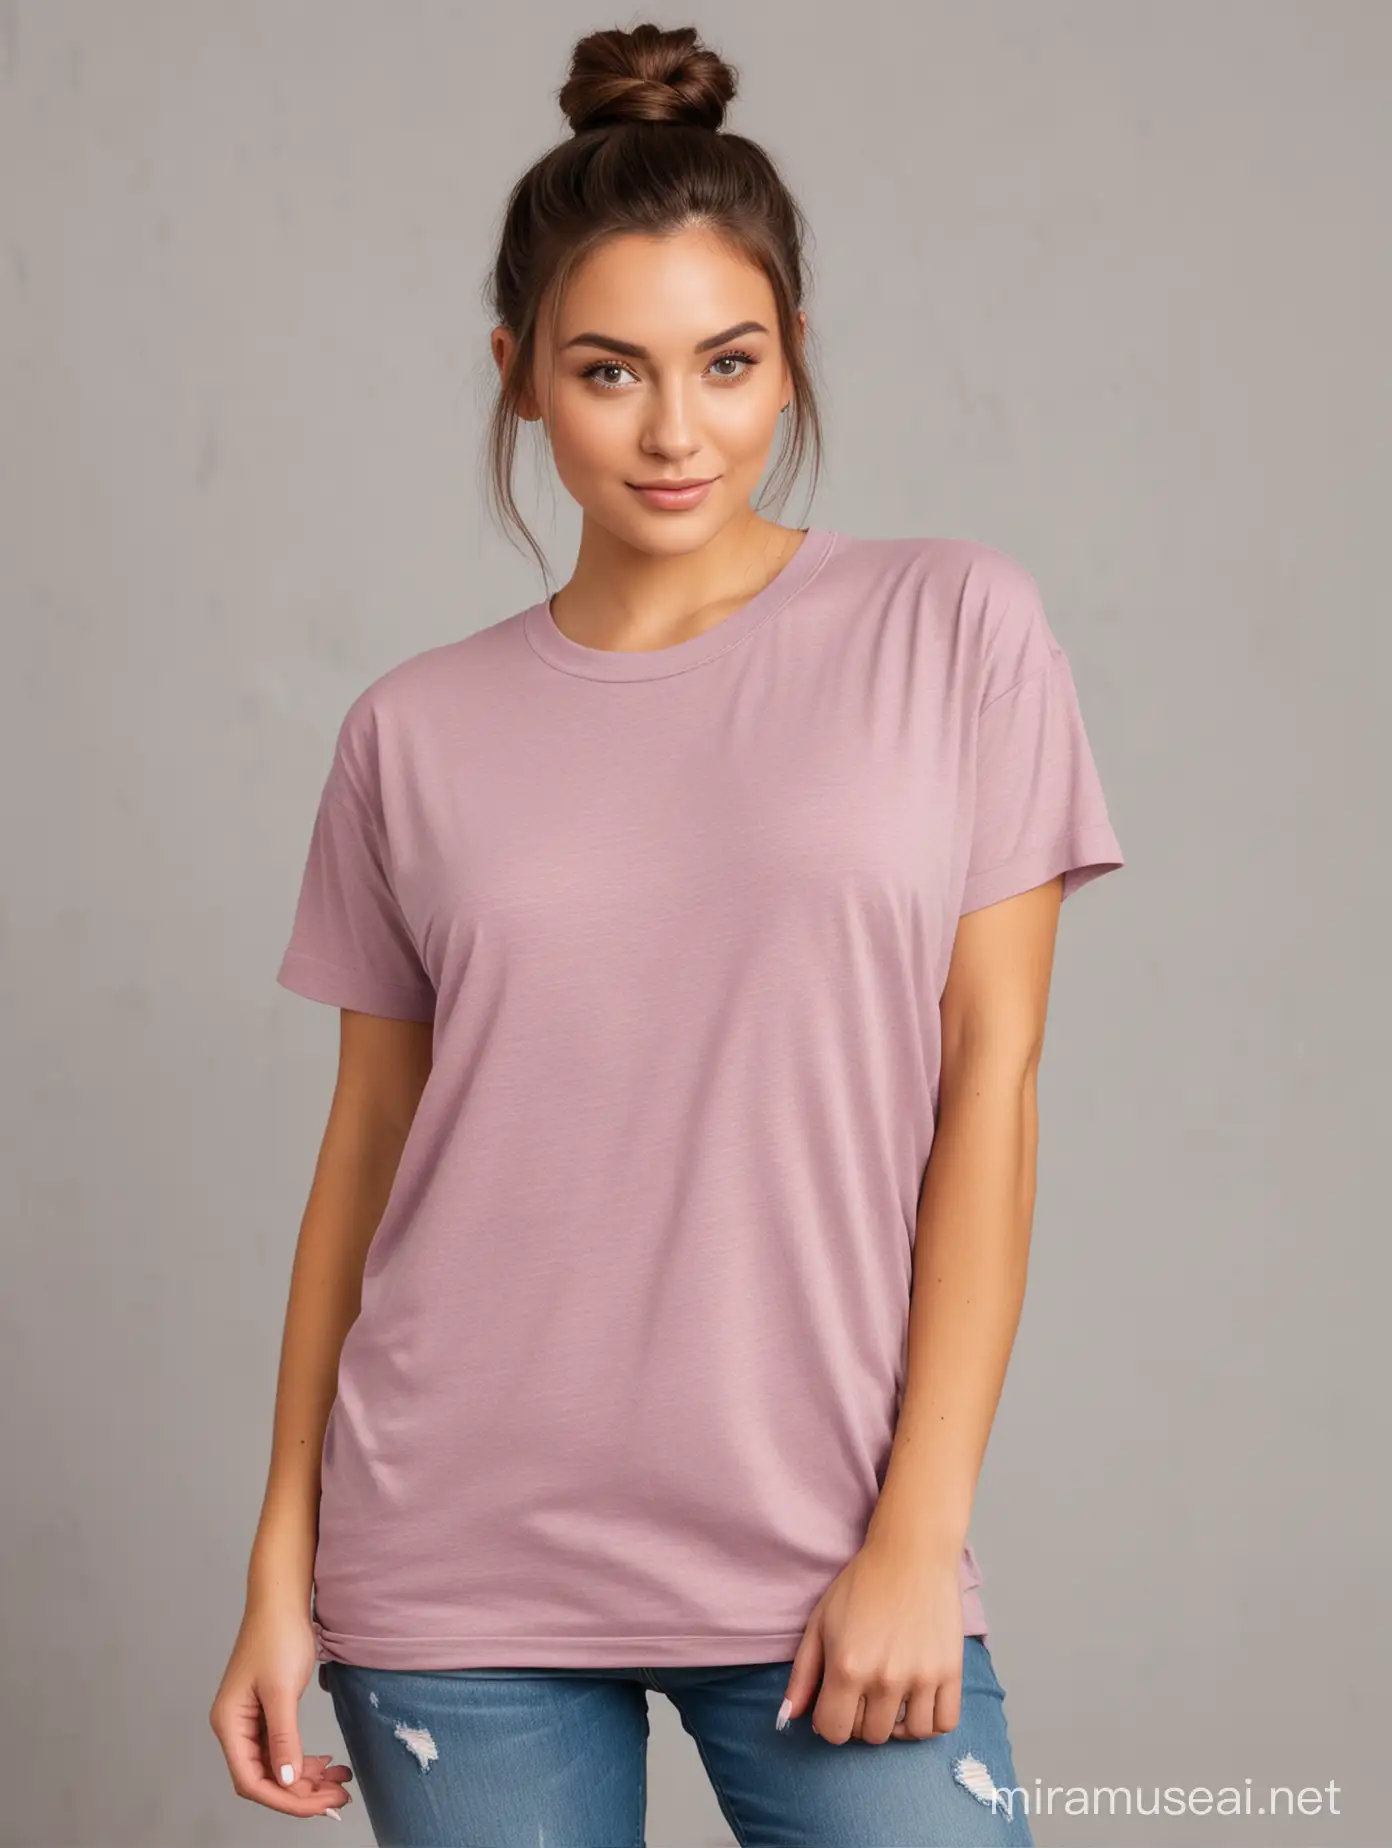 model wearing an oversized Bella Canvas Heather Mauve color plain tshirt with hair tied